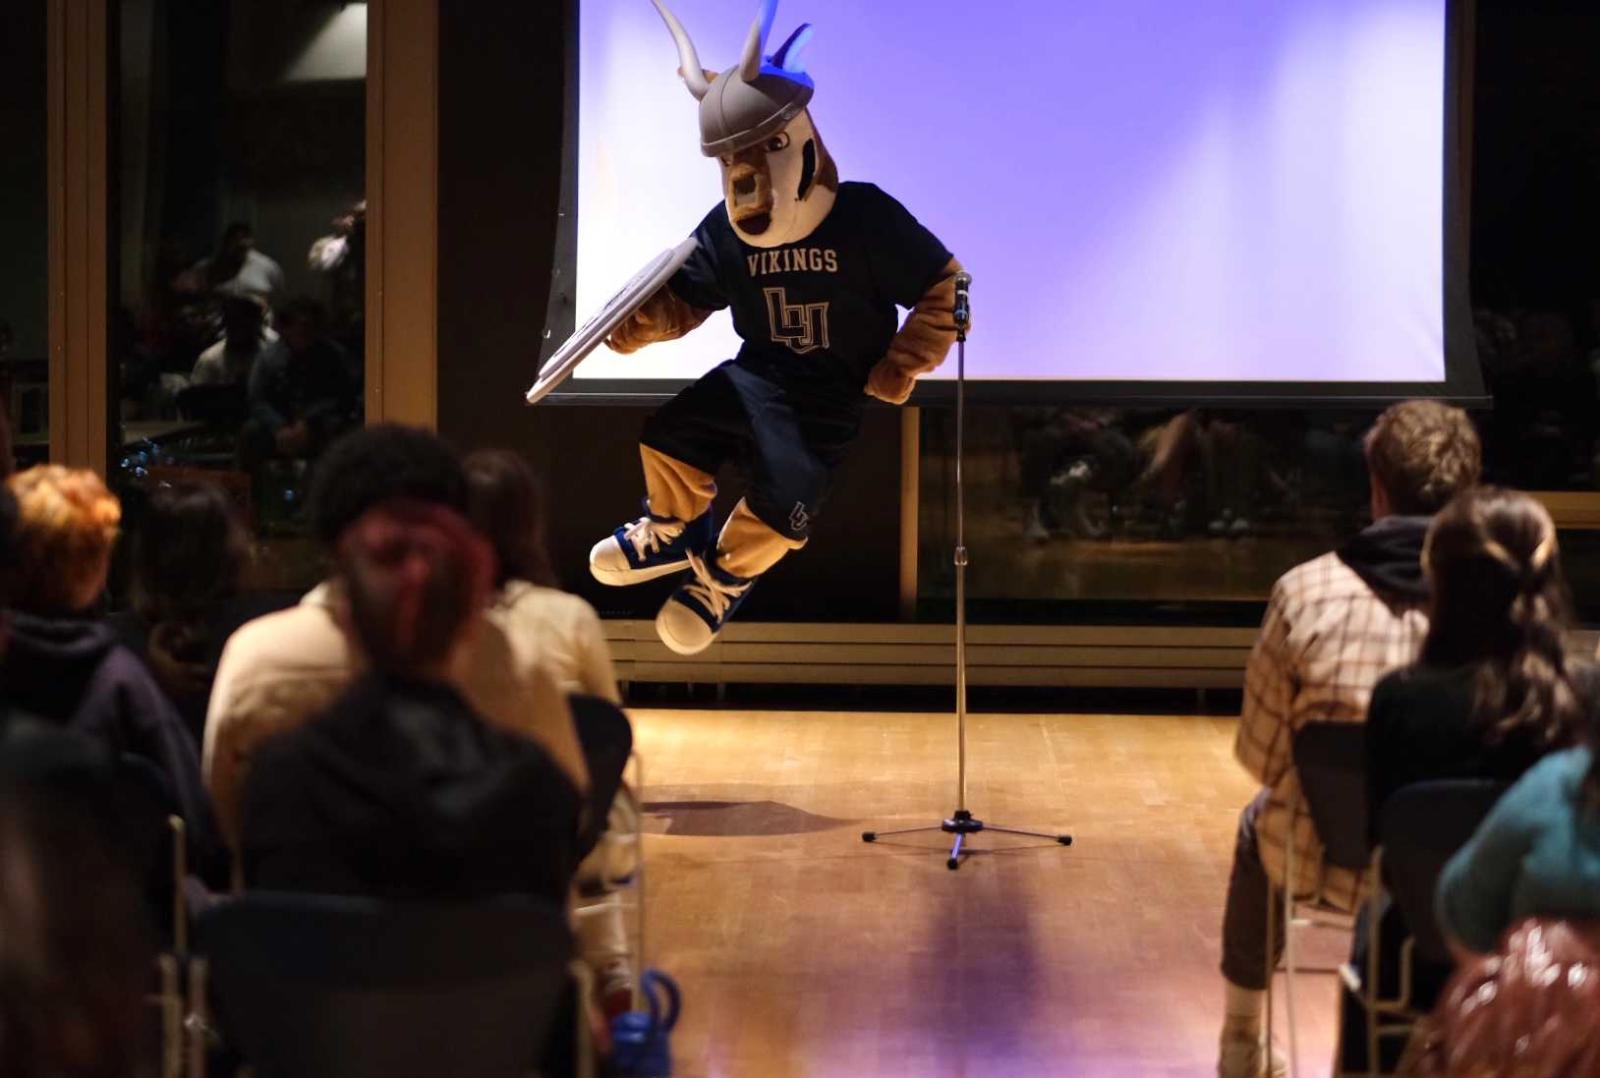 The antelope mascot performs on stage during the student talent show.